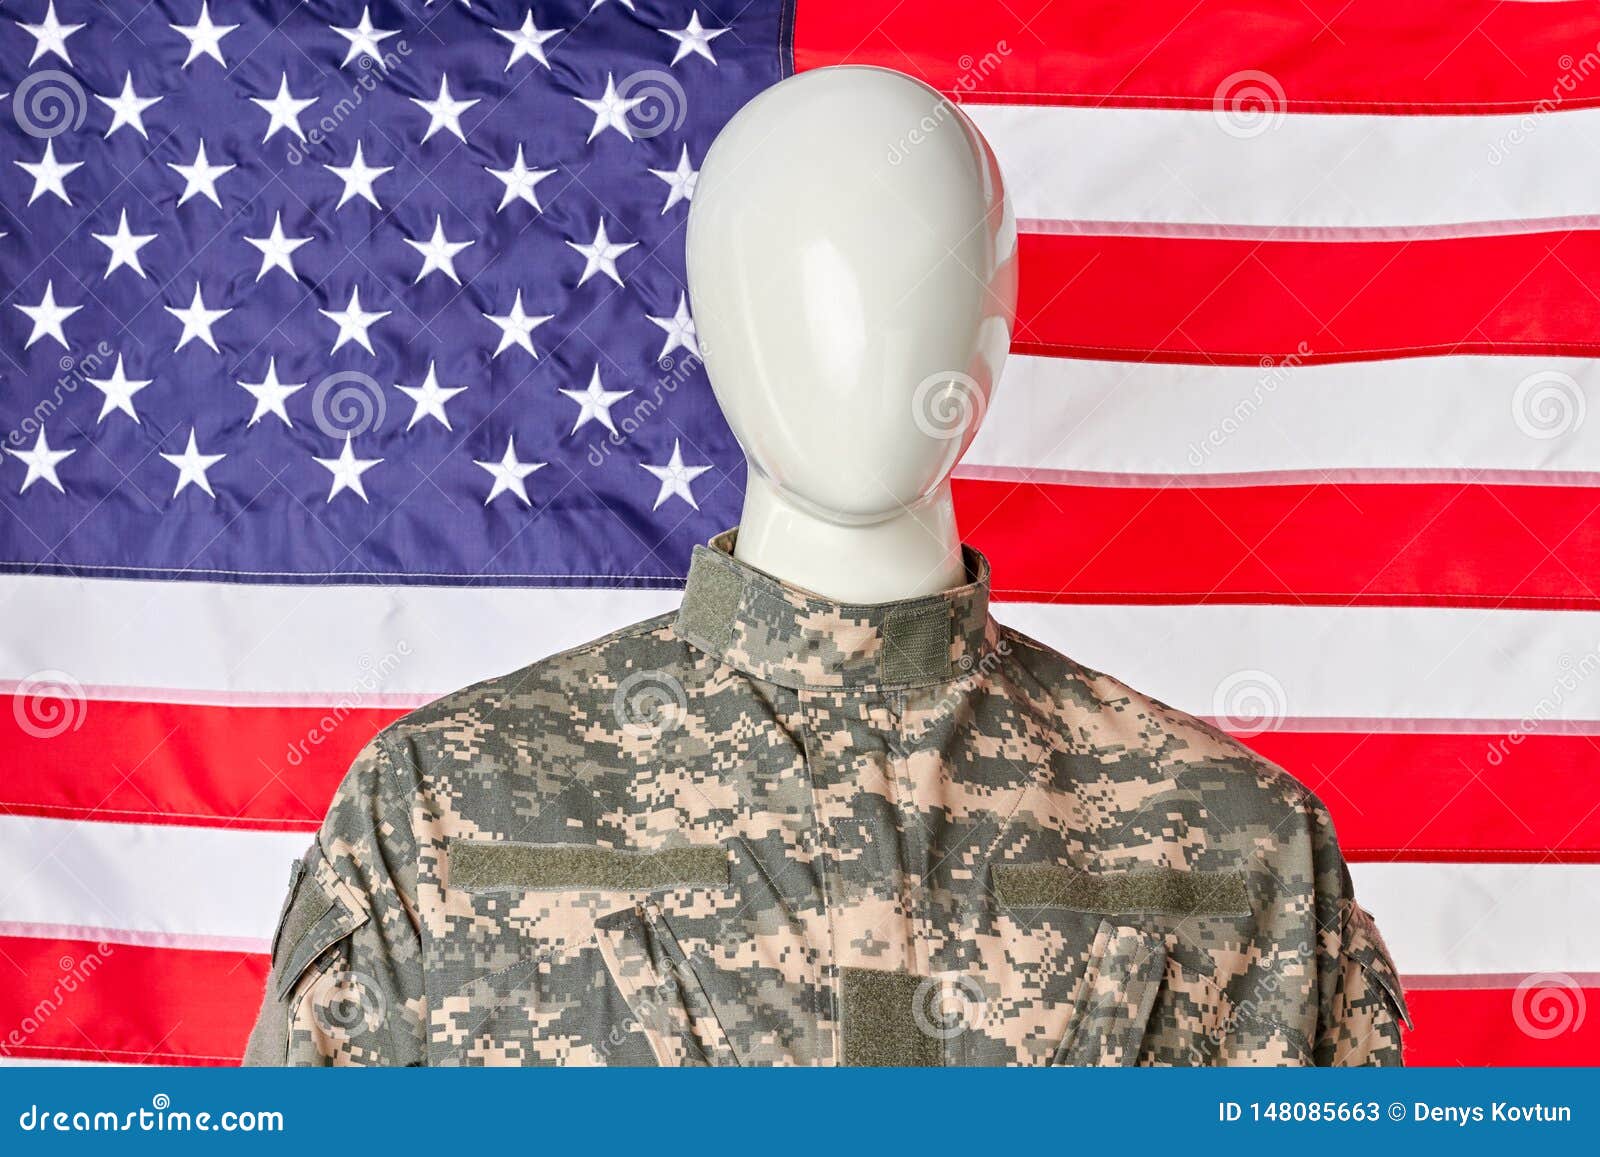 Profile of the United States Army: The Uniform